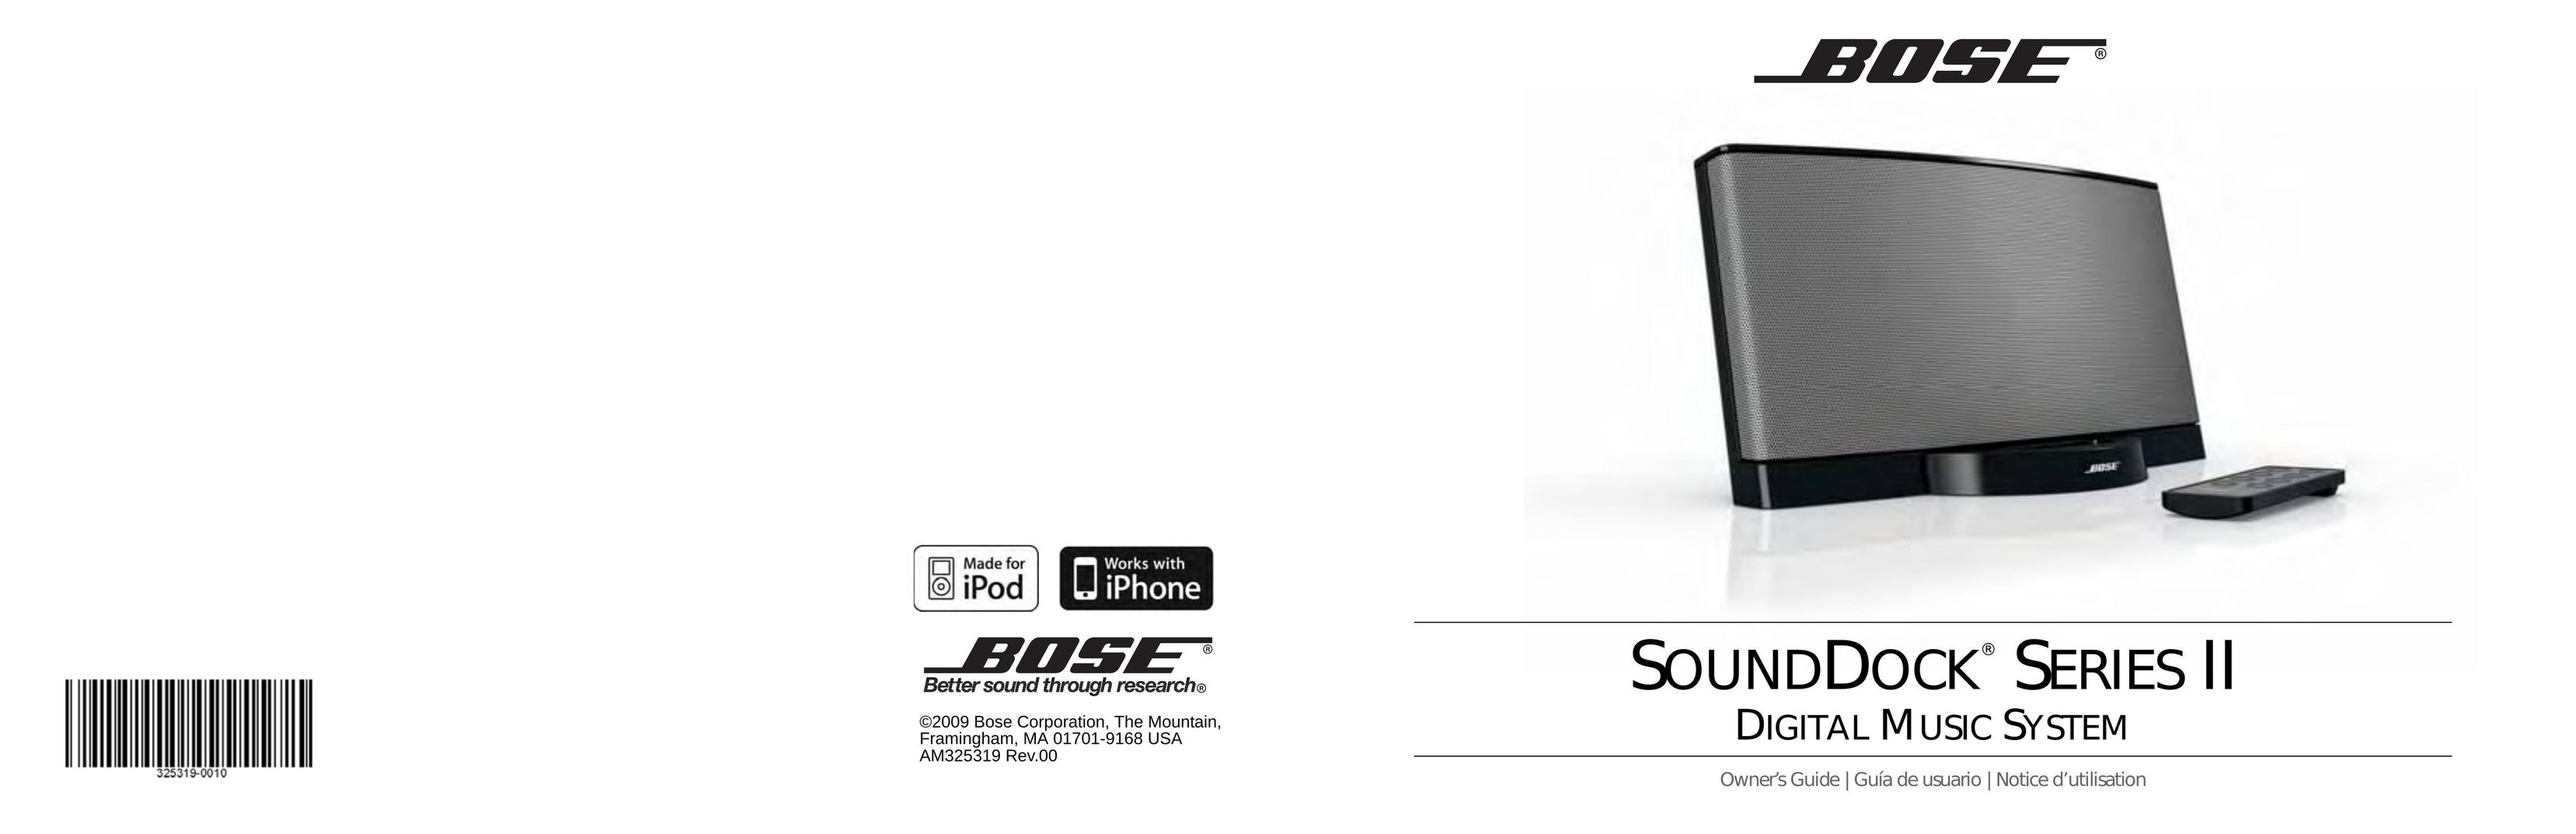 Bose SoundDock Series II (Silver) Stereo System User Manual